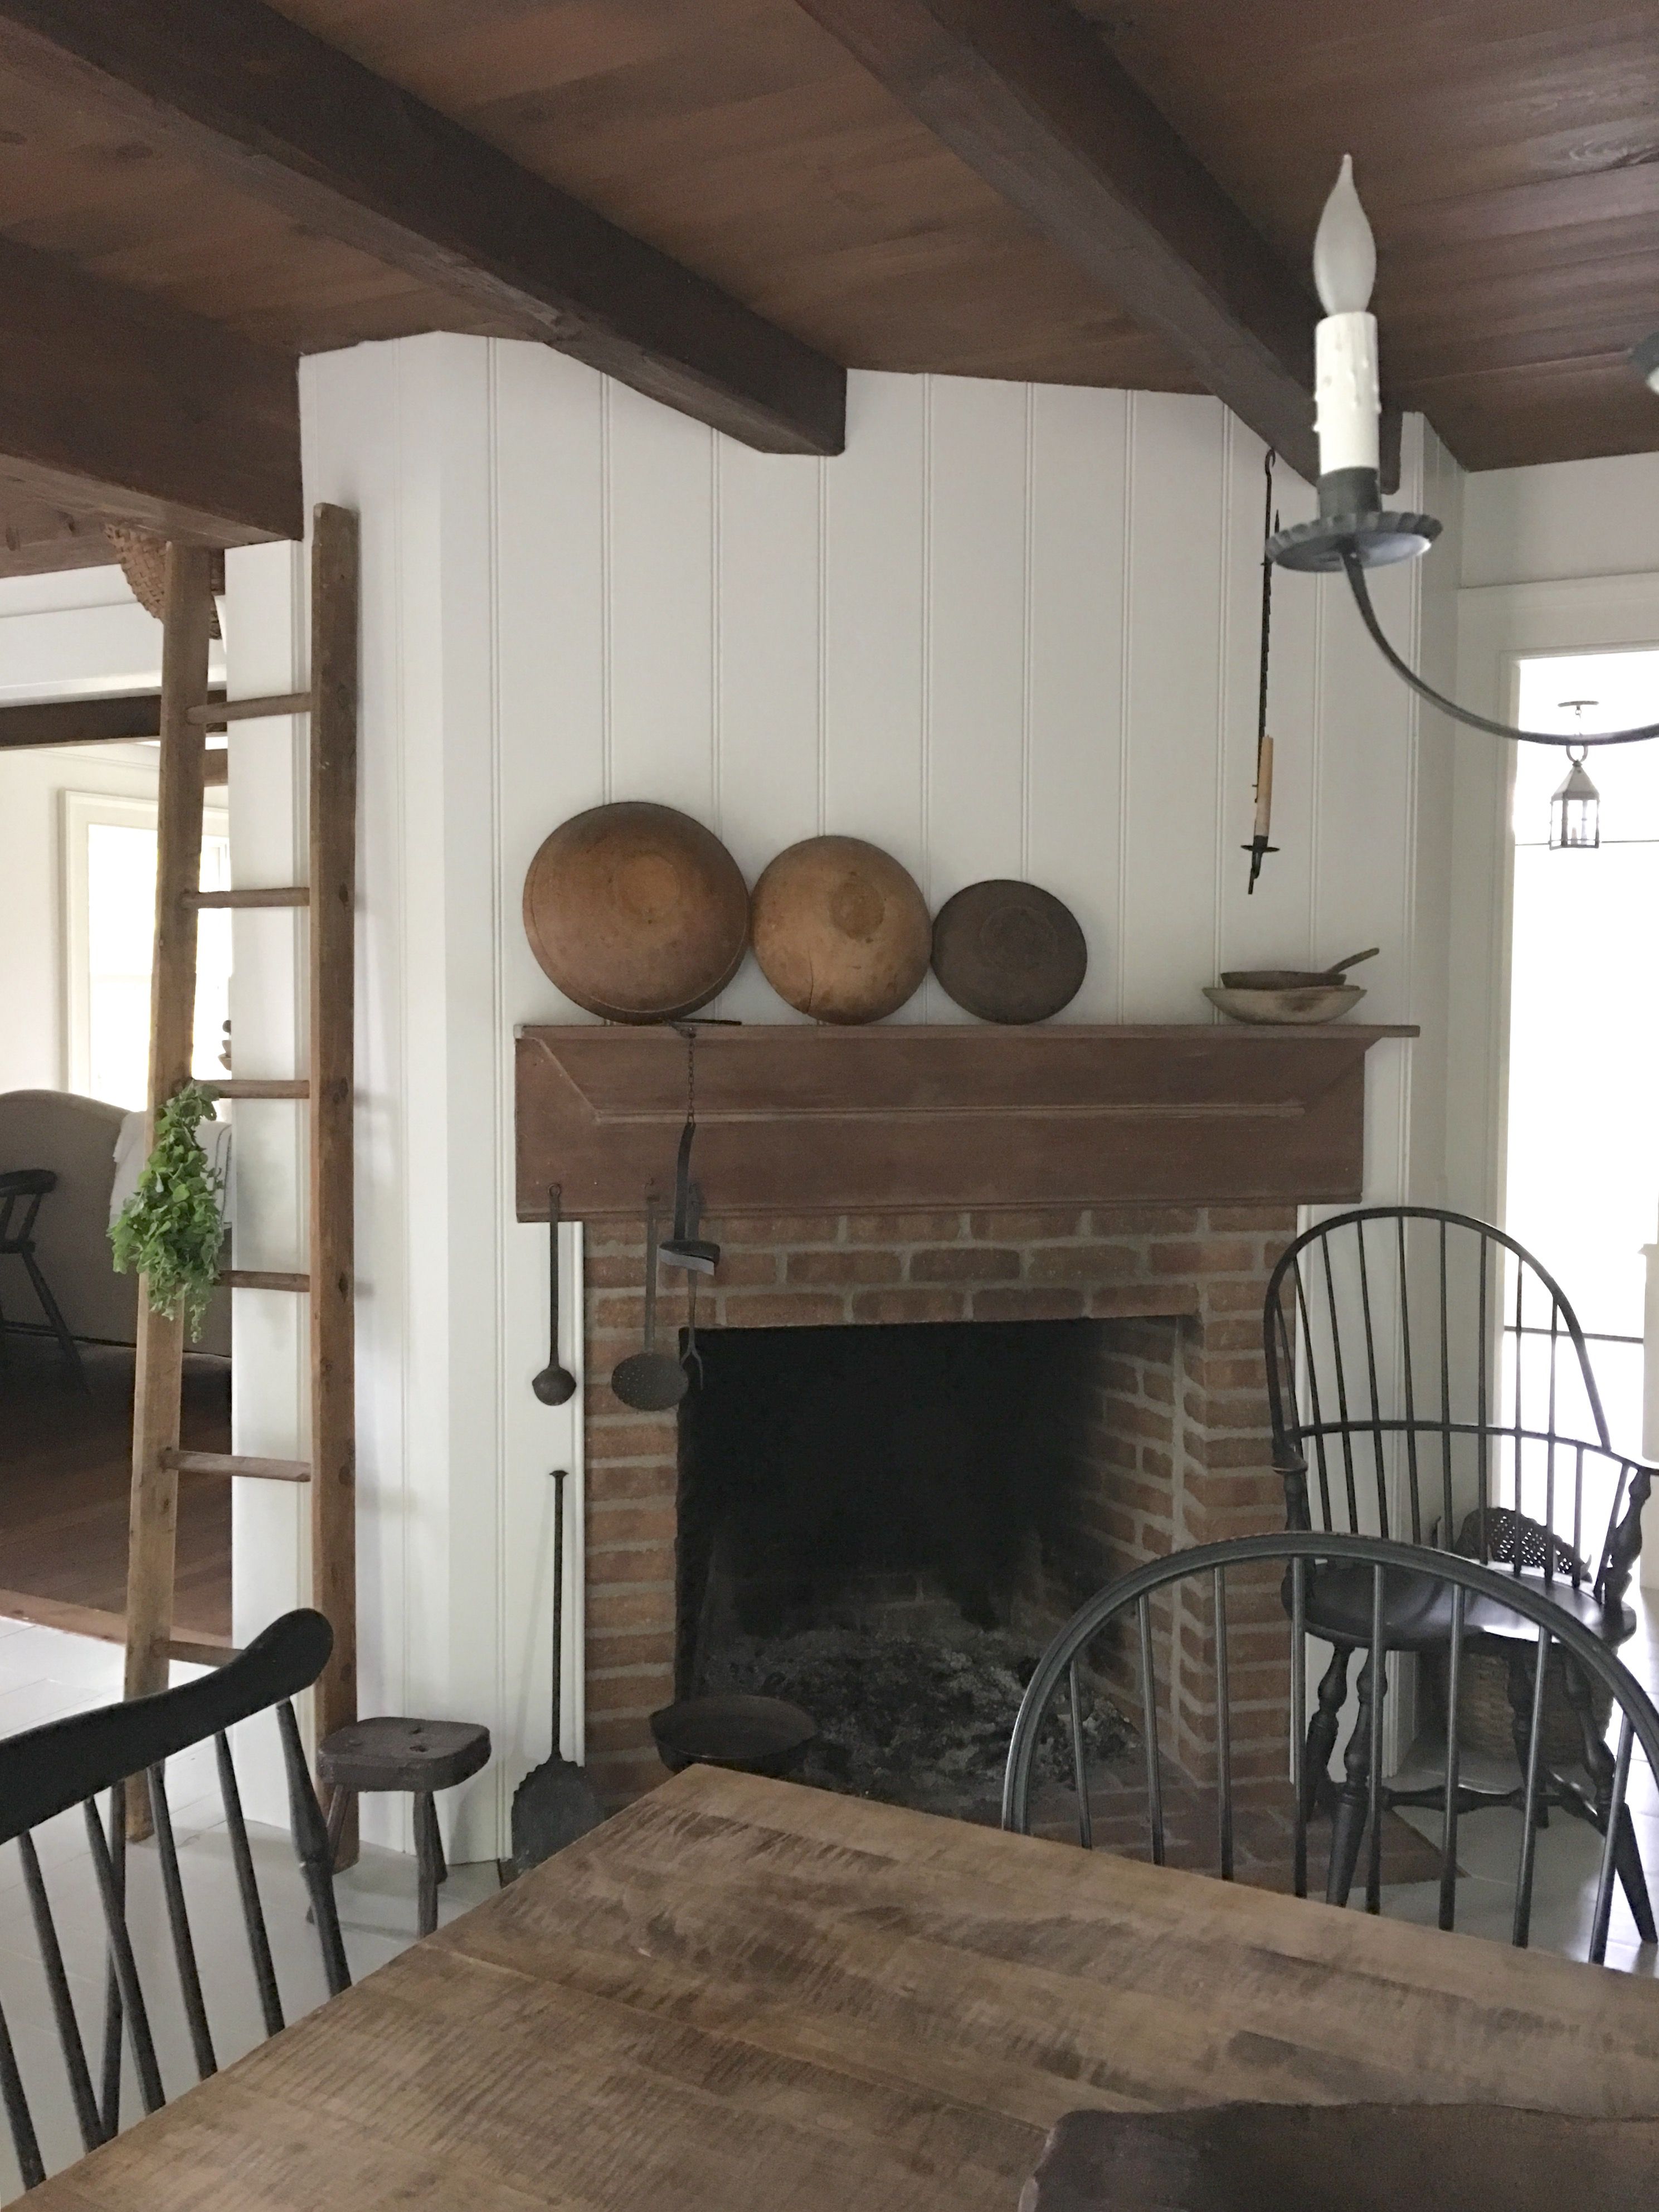 Rustic Fireplace Decor New Pin by Design and Ideas for Home Decor On Dining Room Ideas